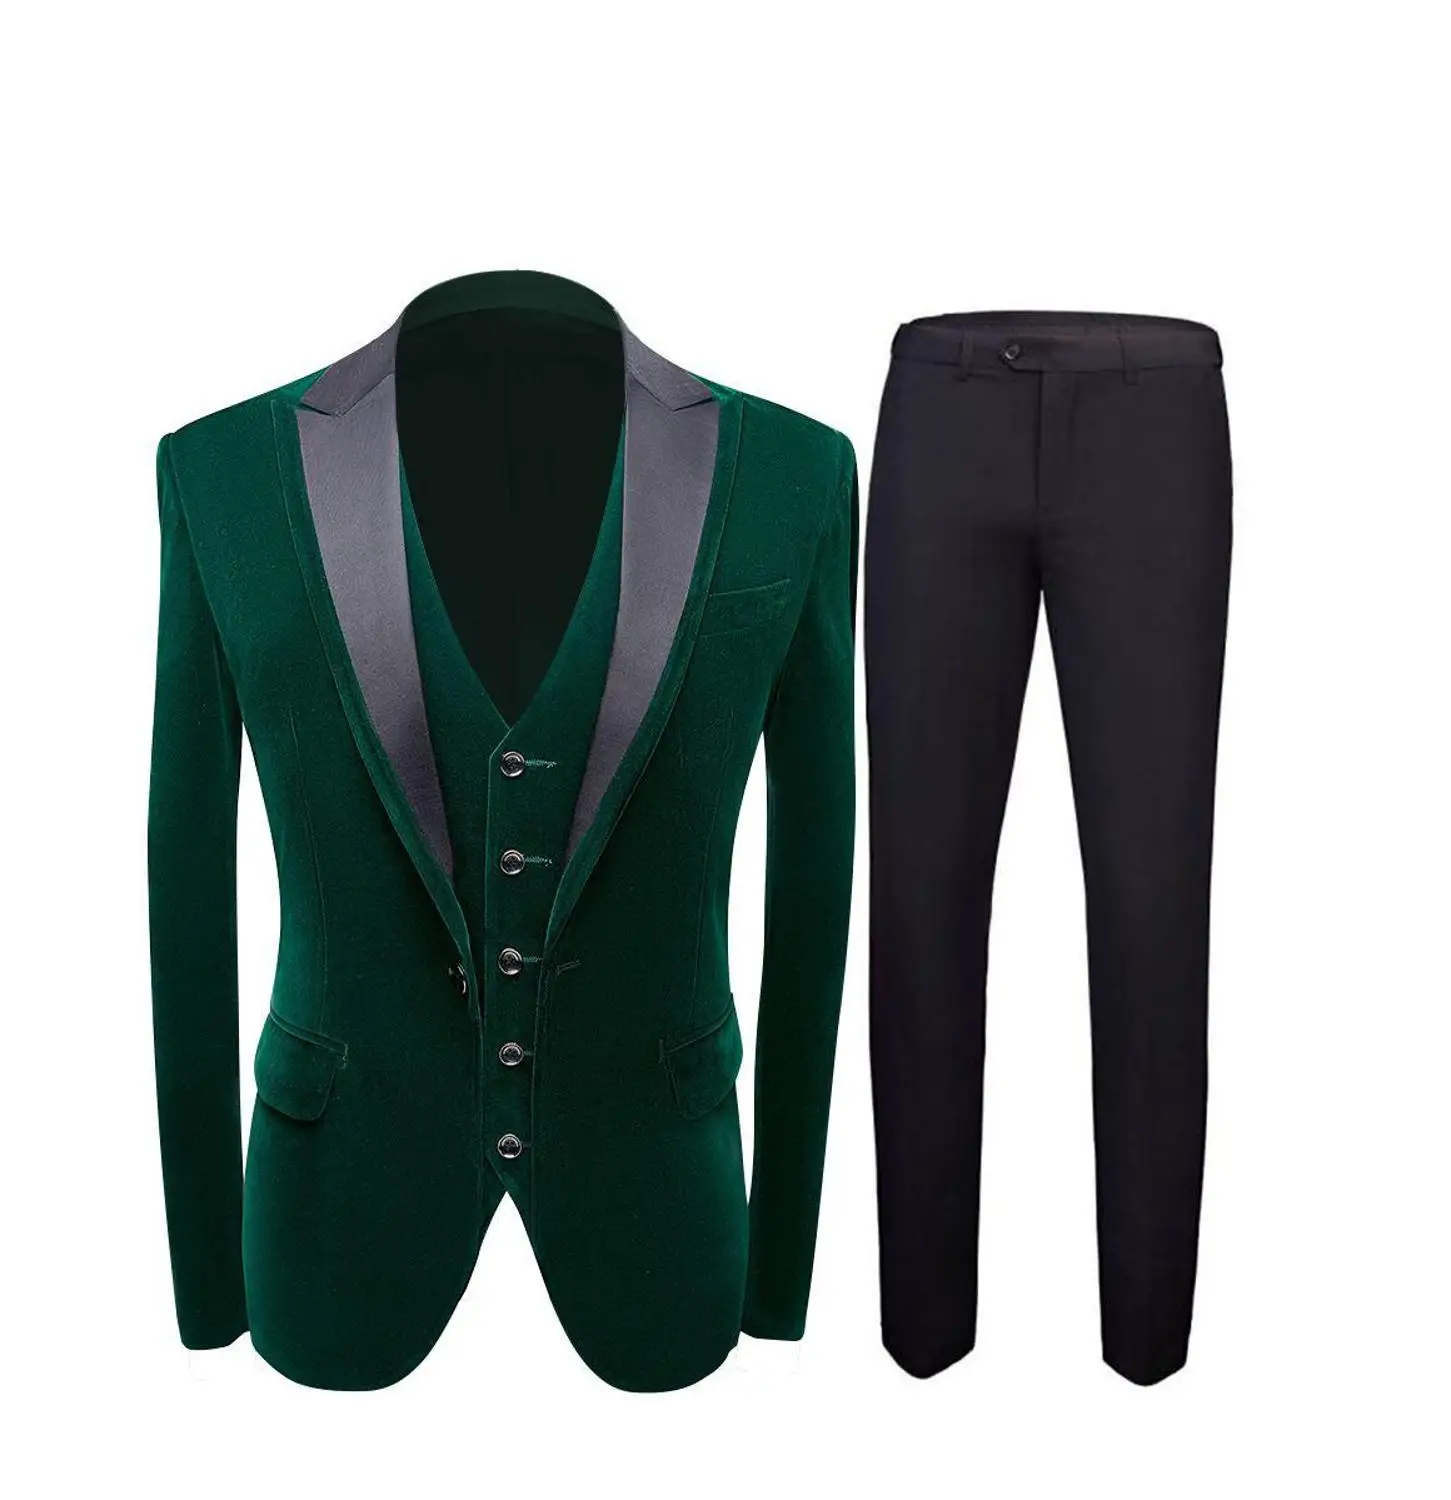 Latest Coat Pant Designs Green velvet Single Breasted Men Suits Slim Fit 3 Pieces Tuxedo Custom Made Groom Prom Suits Ternos